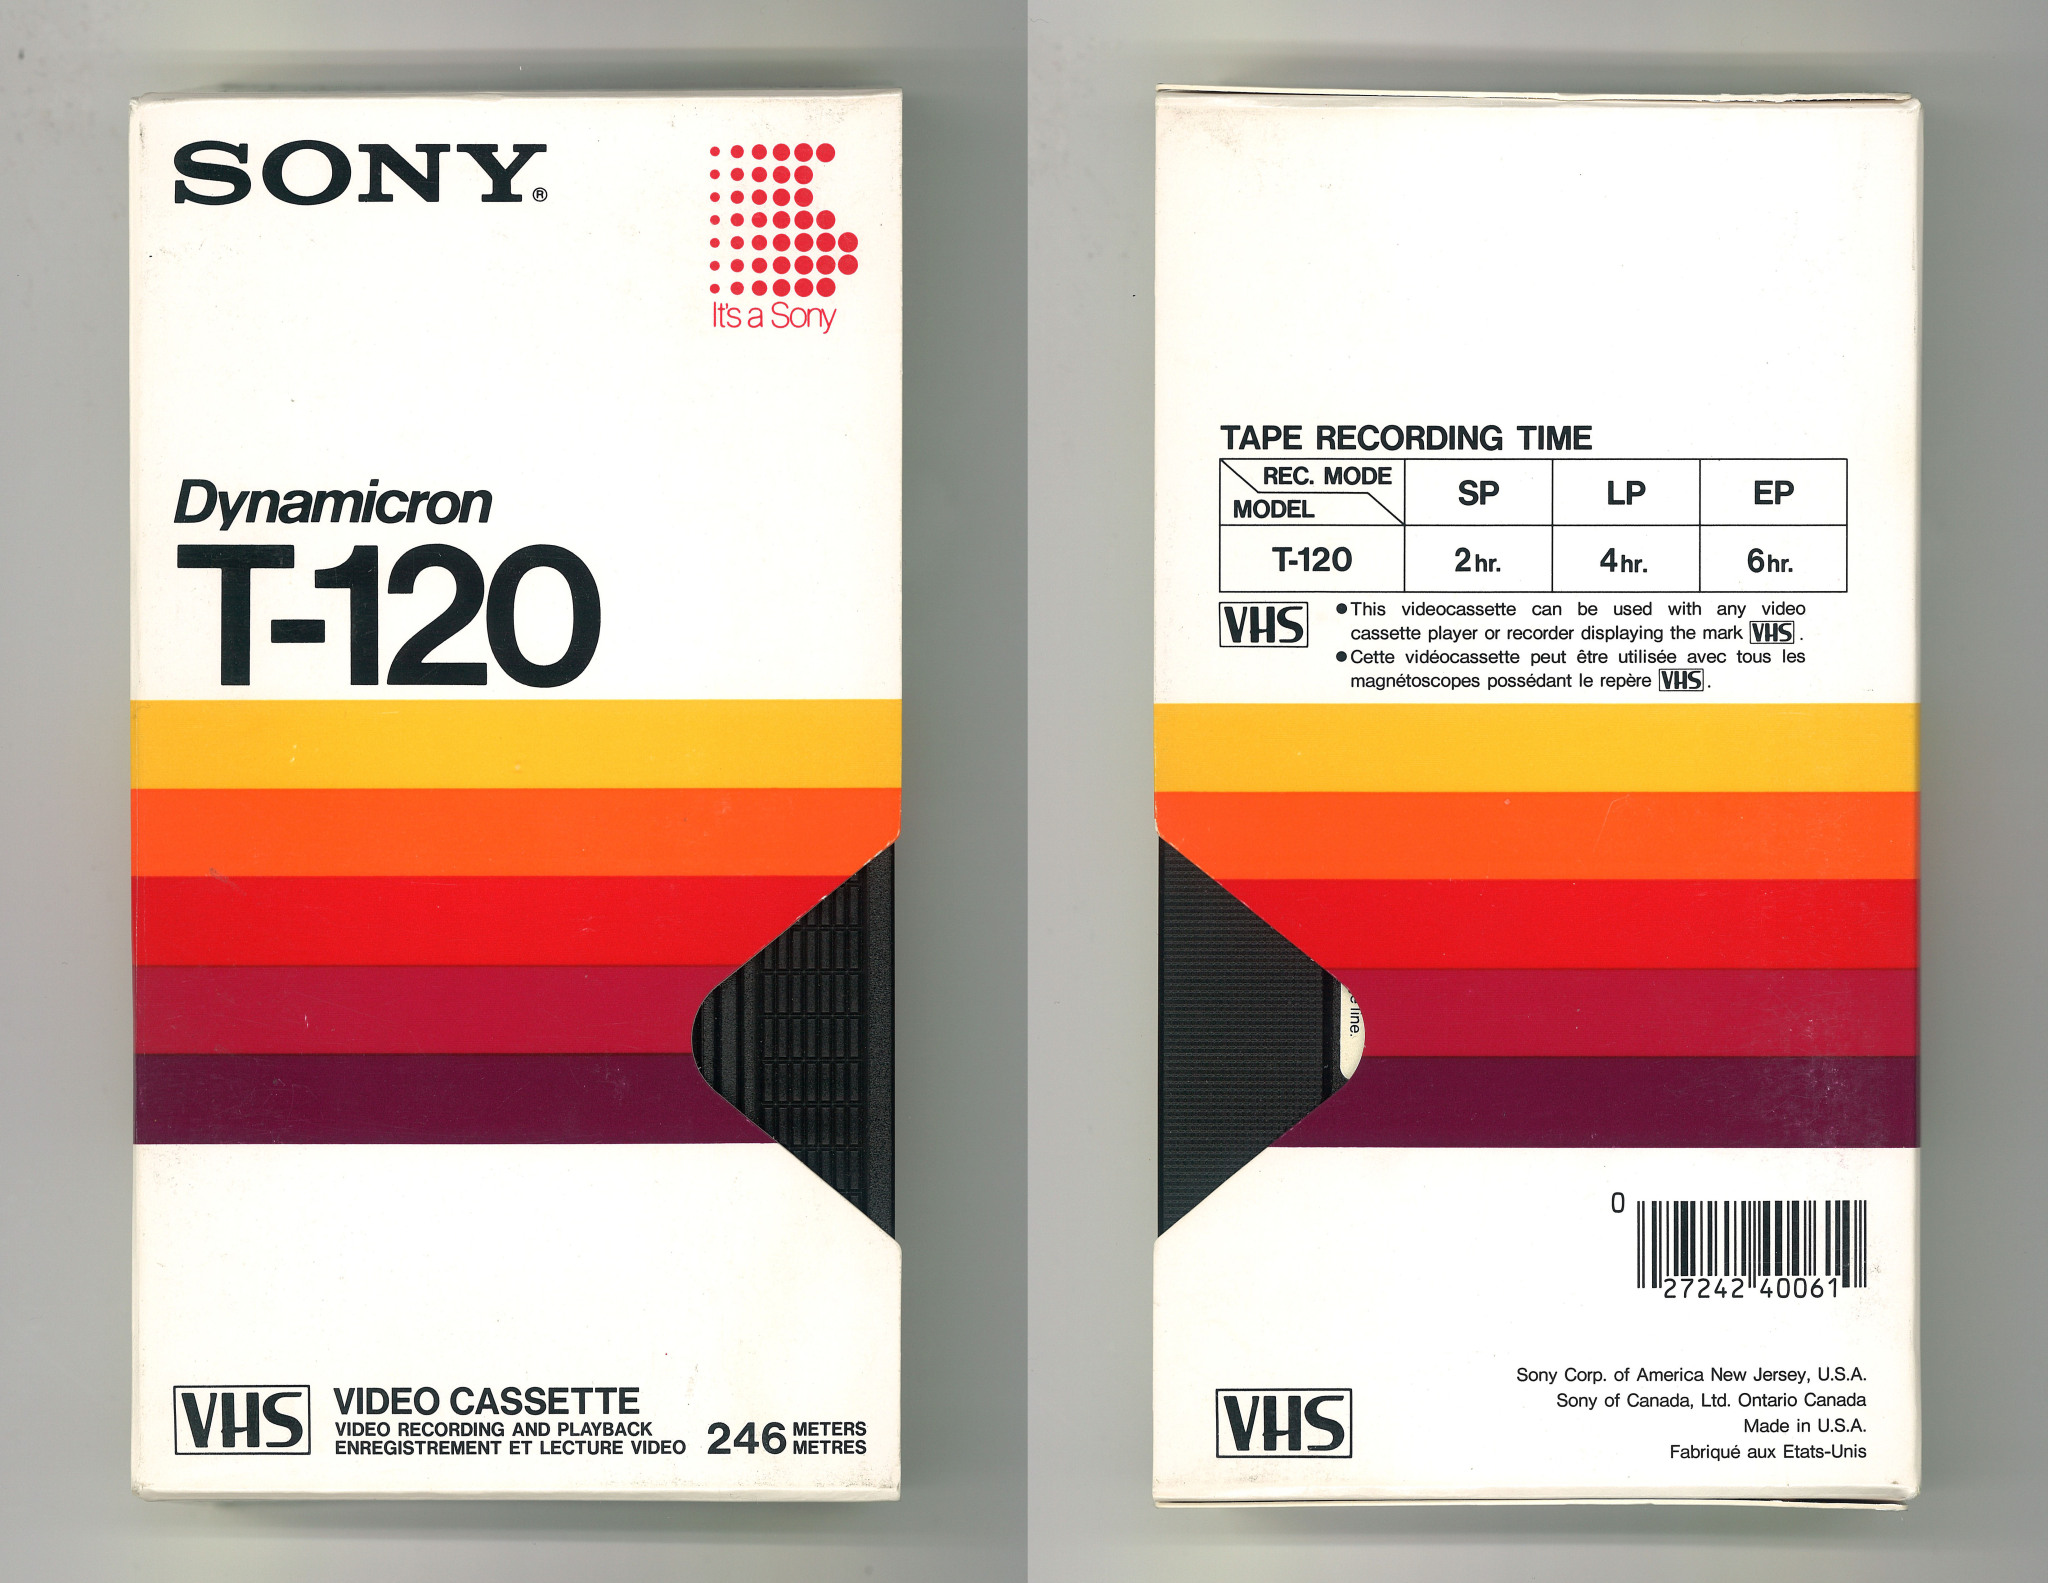 Front and back sleeve covers of the Sony T-120 Dynamicron VHS tape.